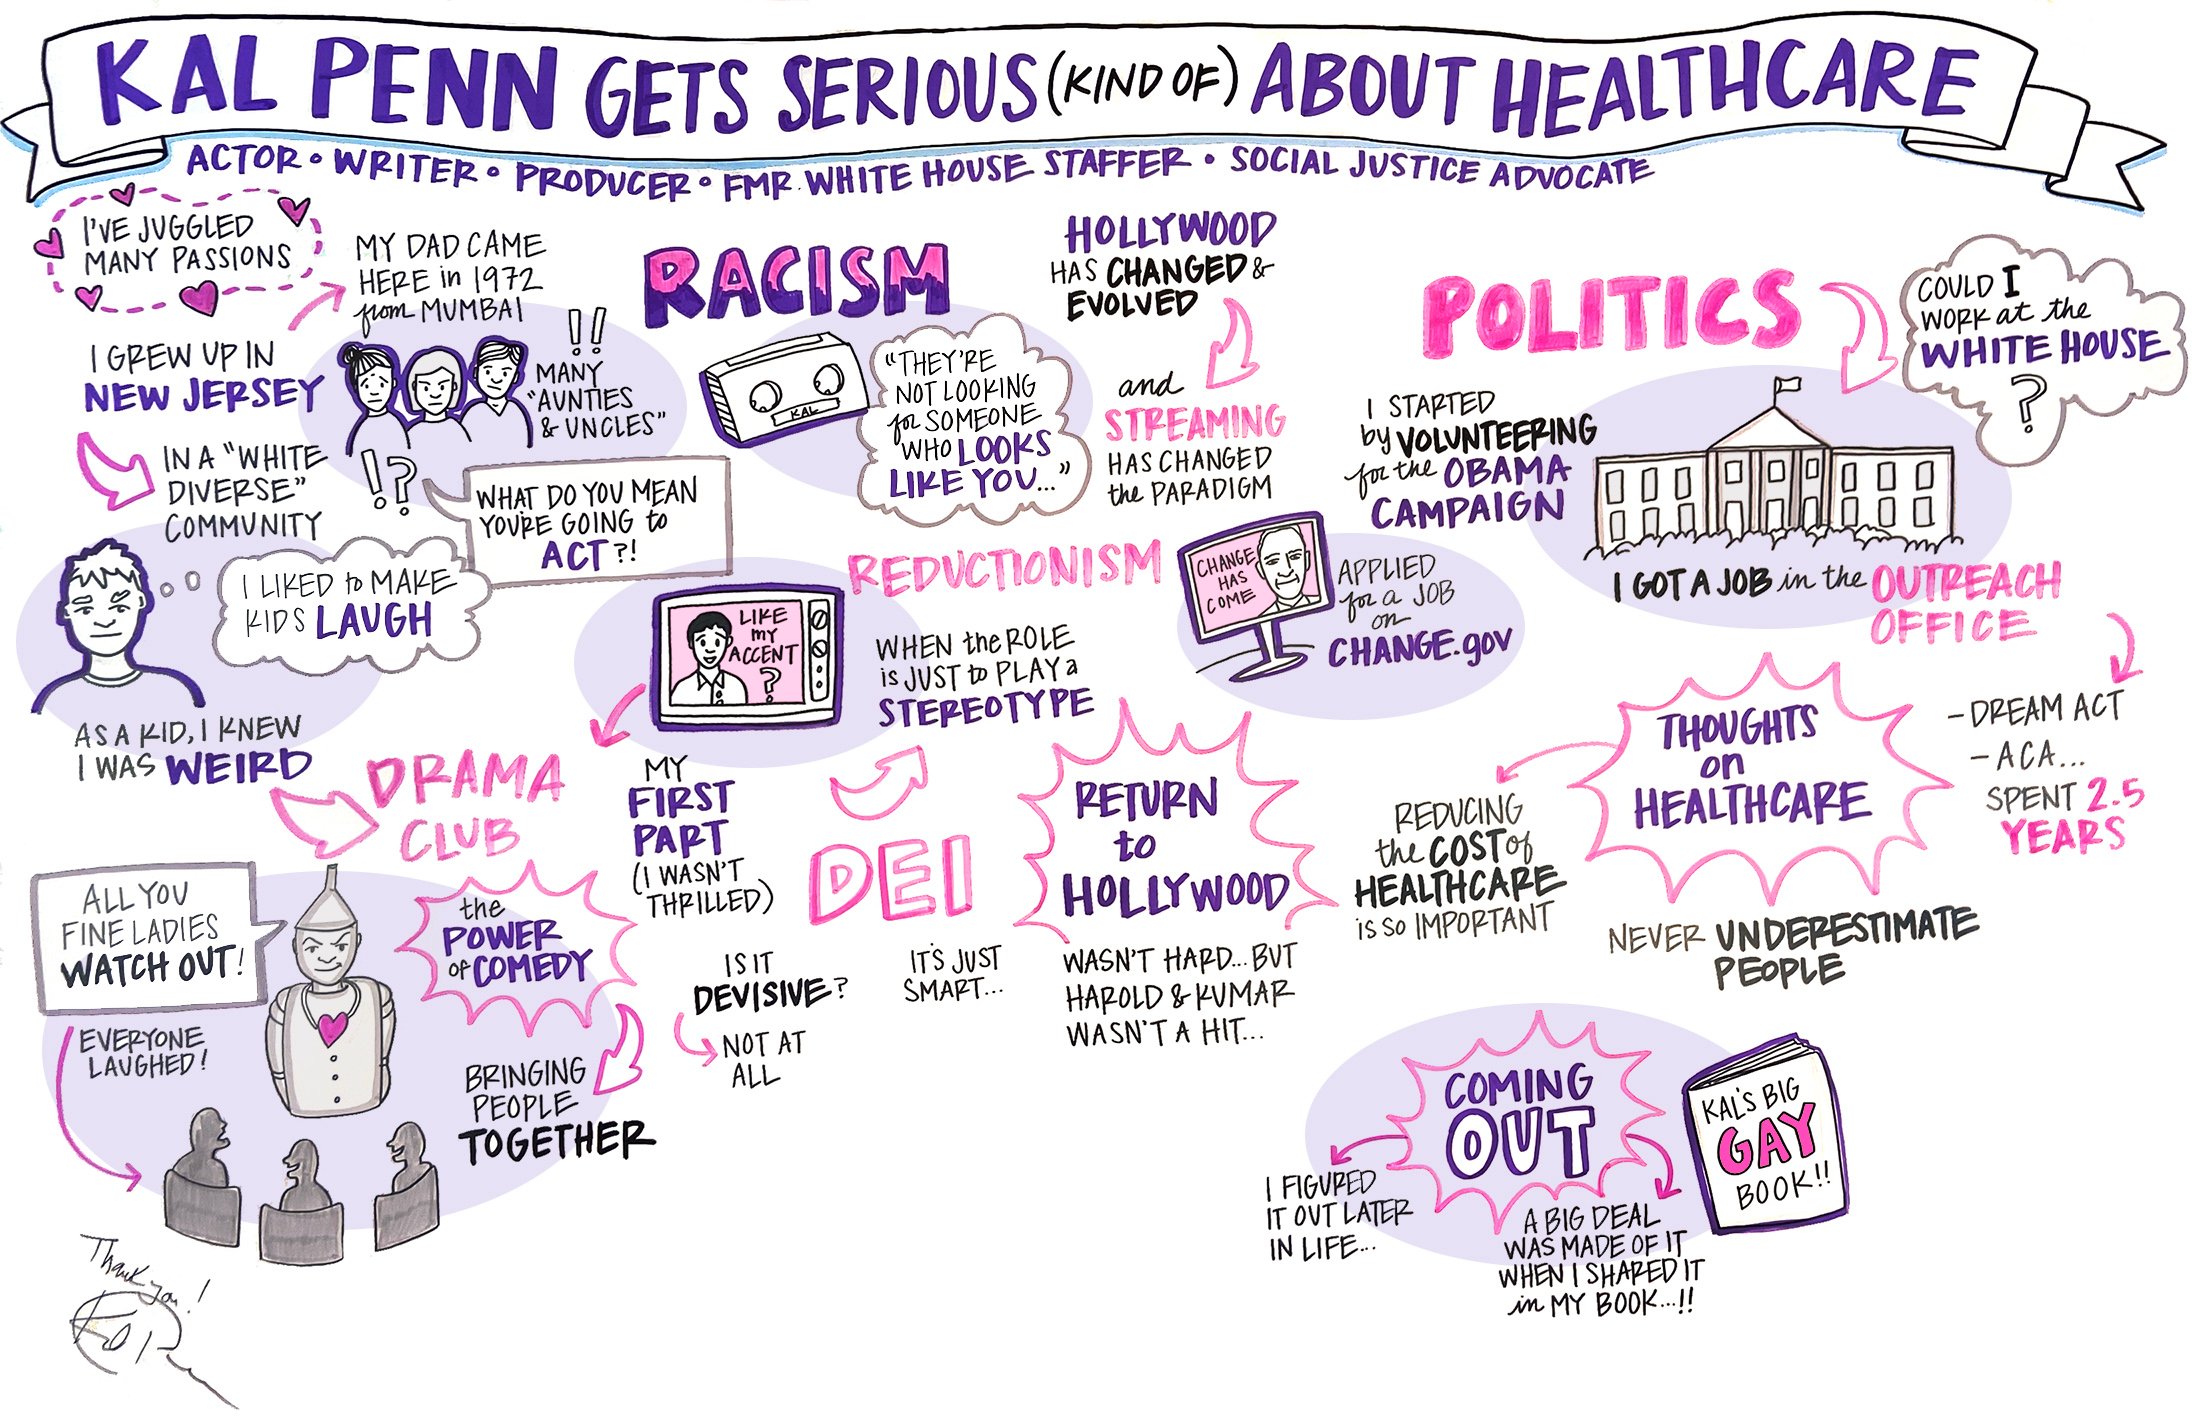 Kal Penn Gets Serious (Kind of) About Healthcare